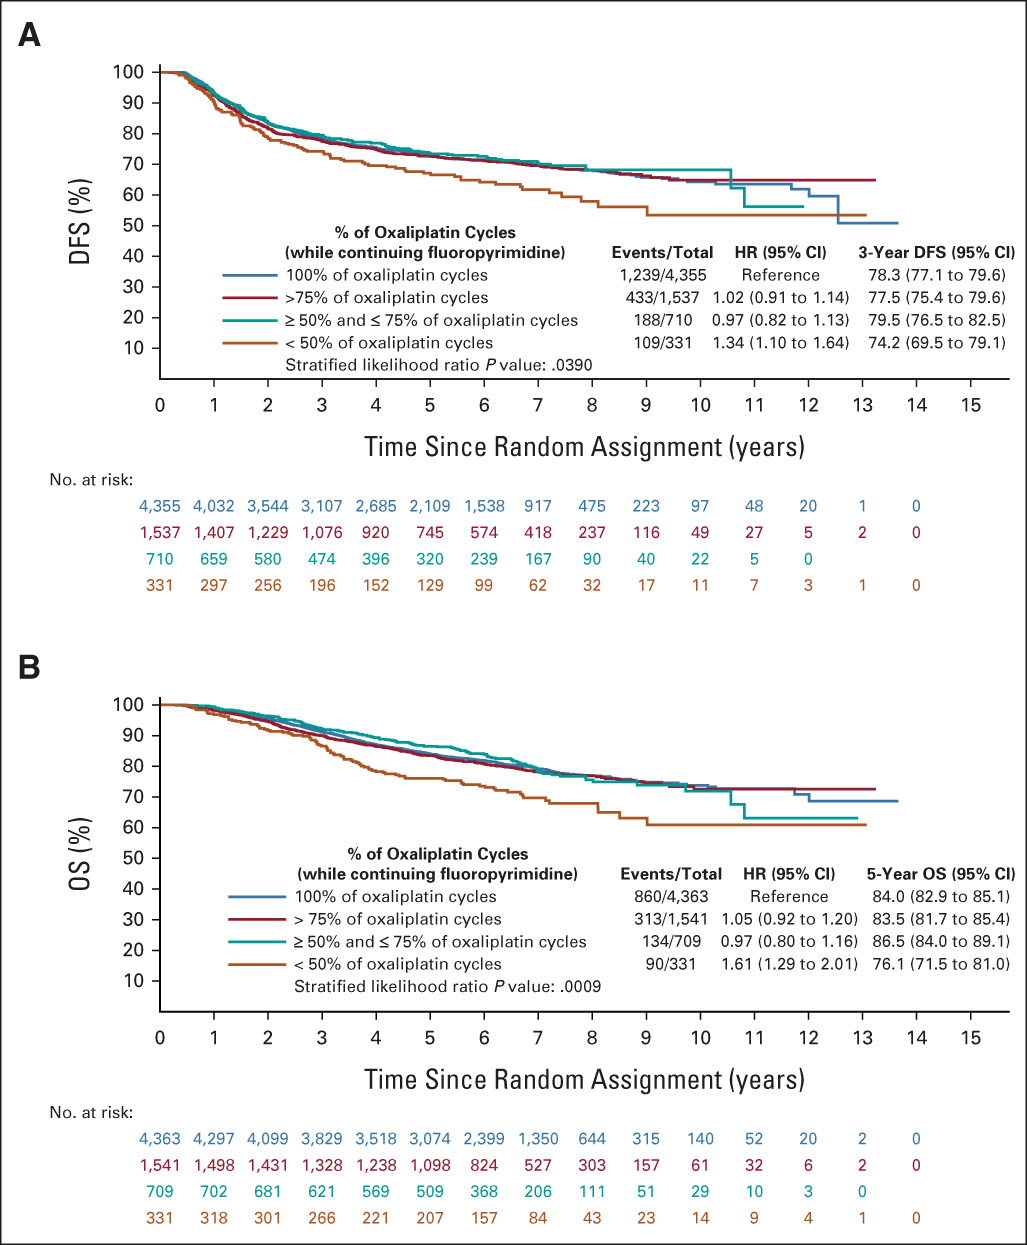 Prognostic Impact of Early Treatment and Oxaliplatin Discontinuation in Patients With Stage III Colon Cancer: An ACCENT/IDEA Pooled Analysis of 11 Adjuvant Trials